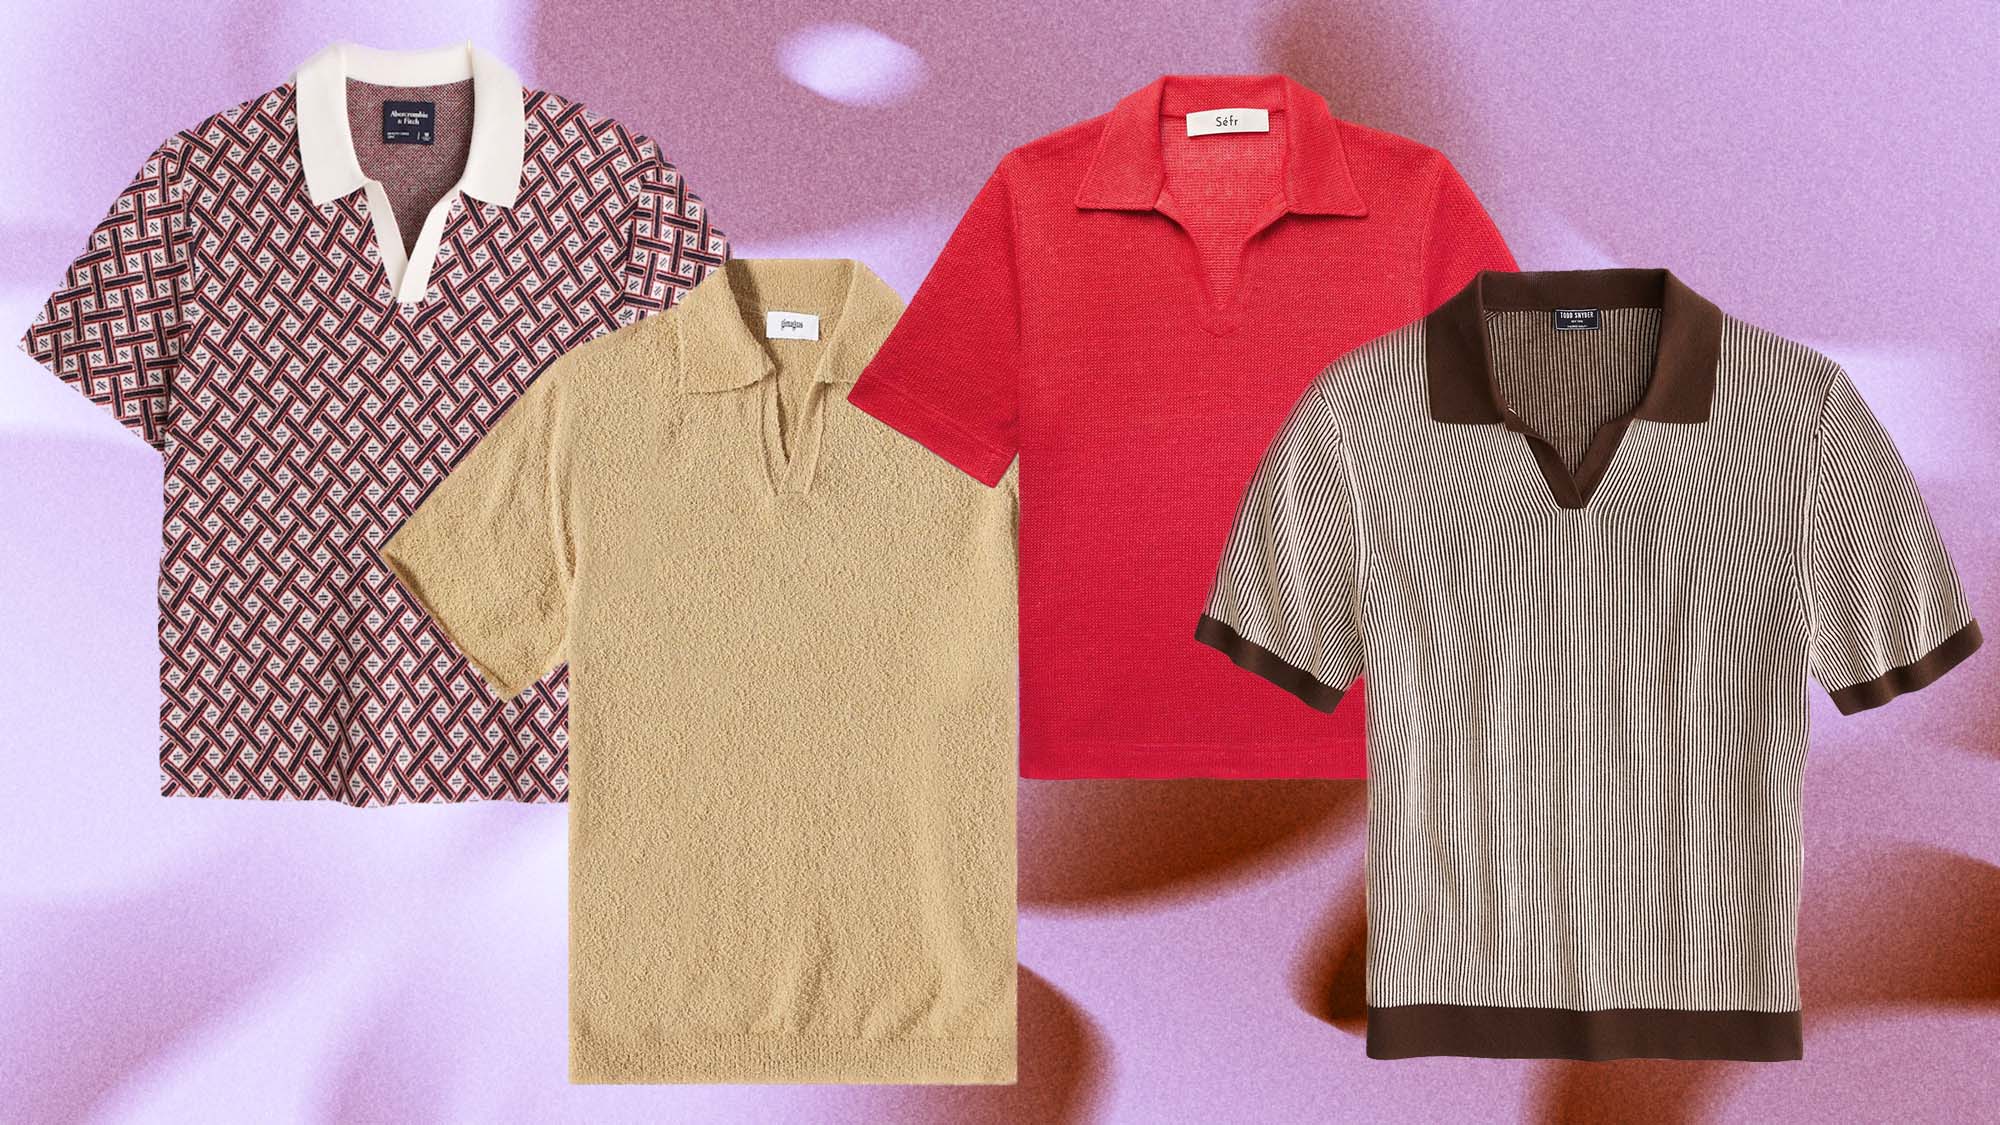 buttonless-polo-shirts-are-the-hottest-polos-on-the-planet-right-now